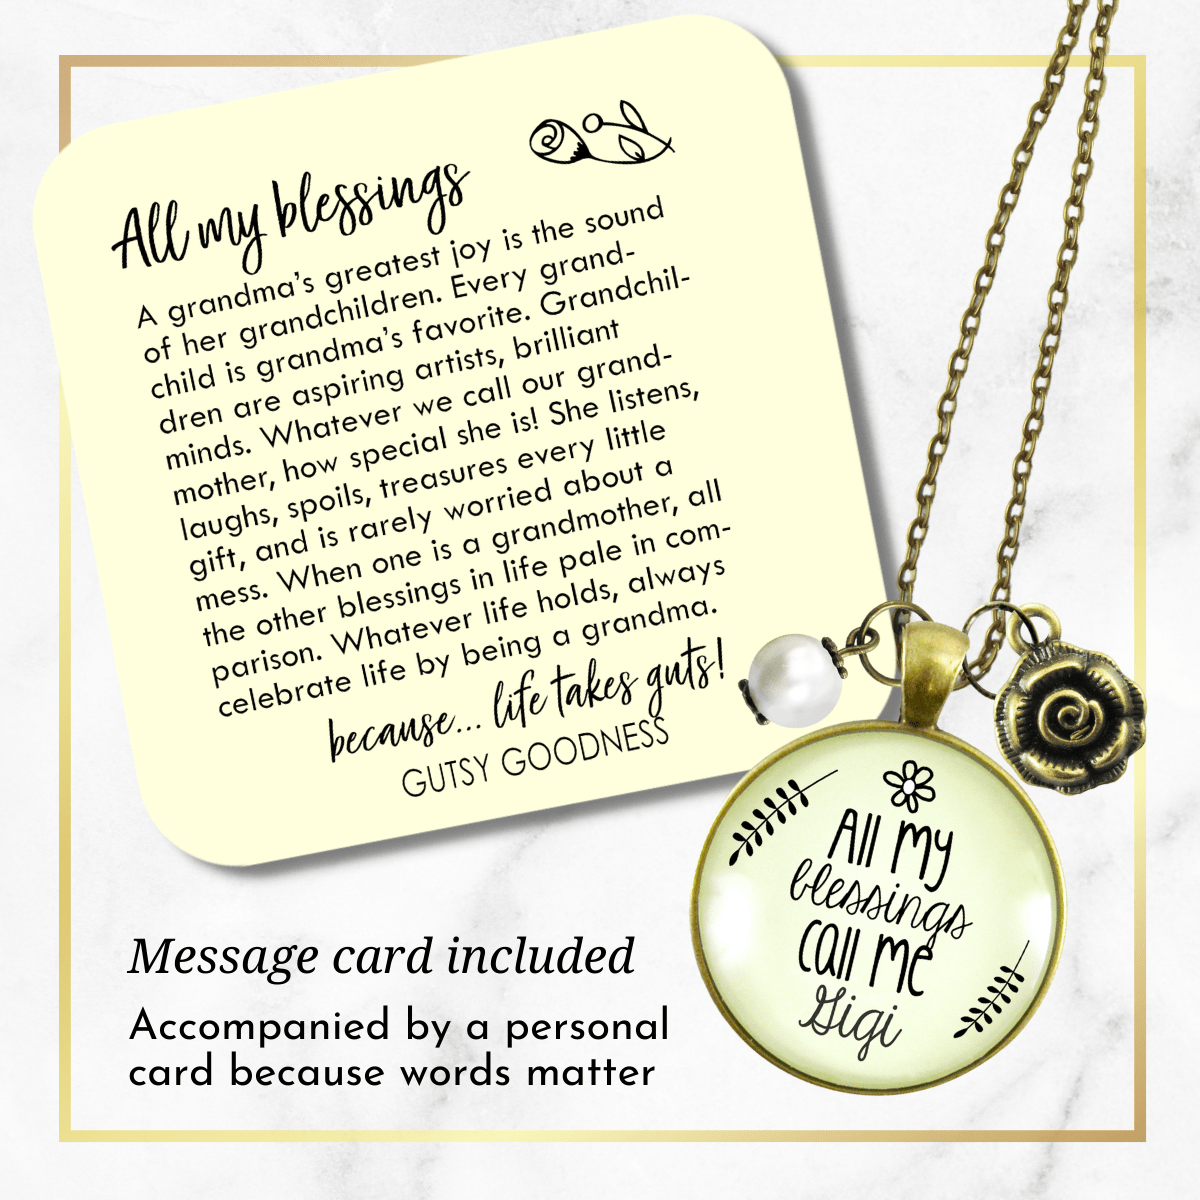 Gutsy Goodness Gigi Necklace All My Blessings Call Me GiGi Gift Quote Womens Grandma - Gutsy Goodness Handmade Jewelry;Gigi Necklace All My Blessings Call Me Gigi Gift Quote Womens Grandma - Gutsy Goodness Handmade Jewelry Gifts